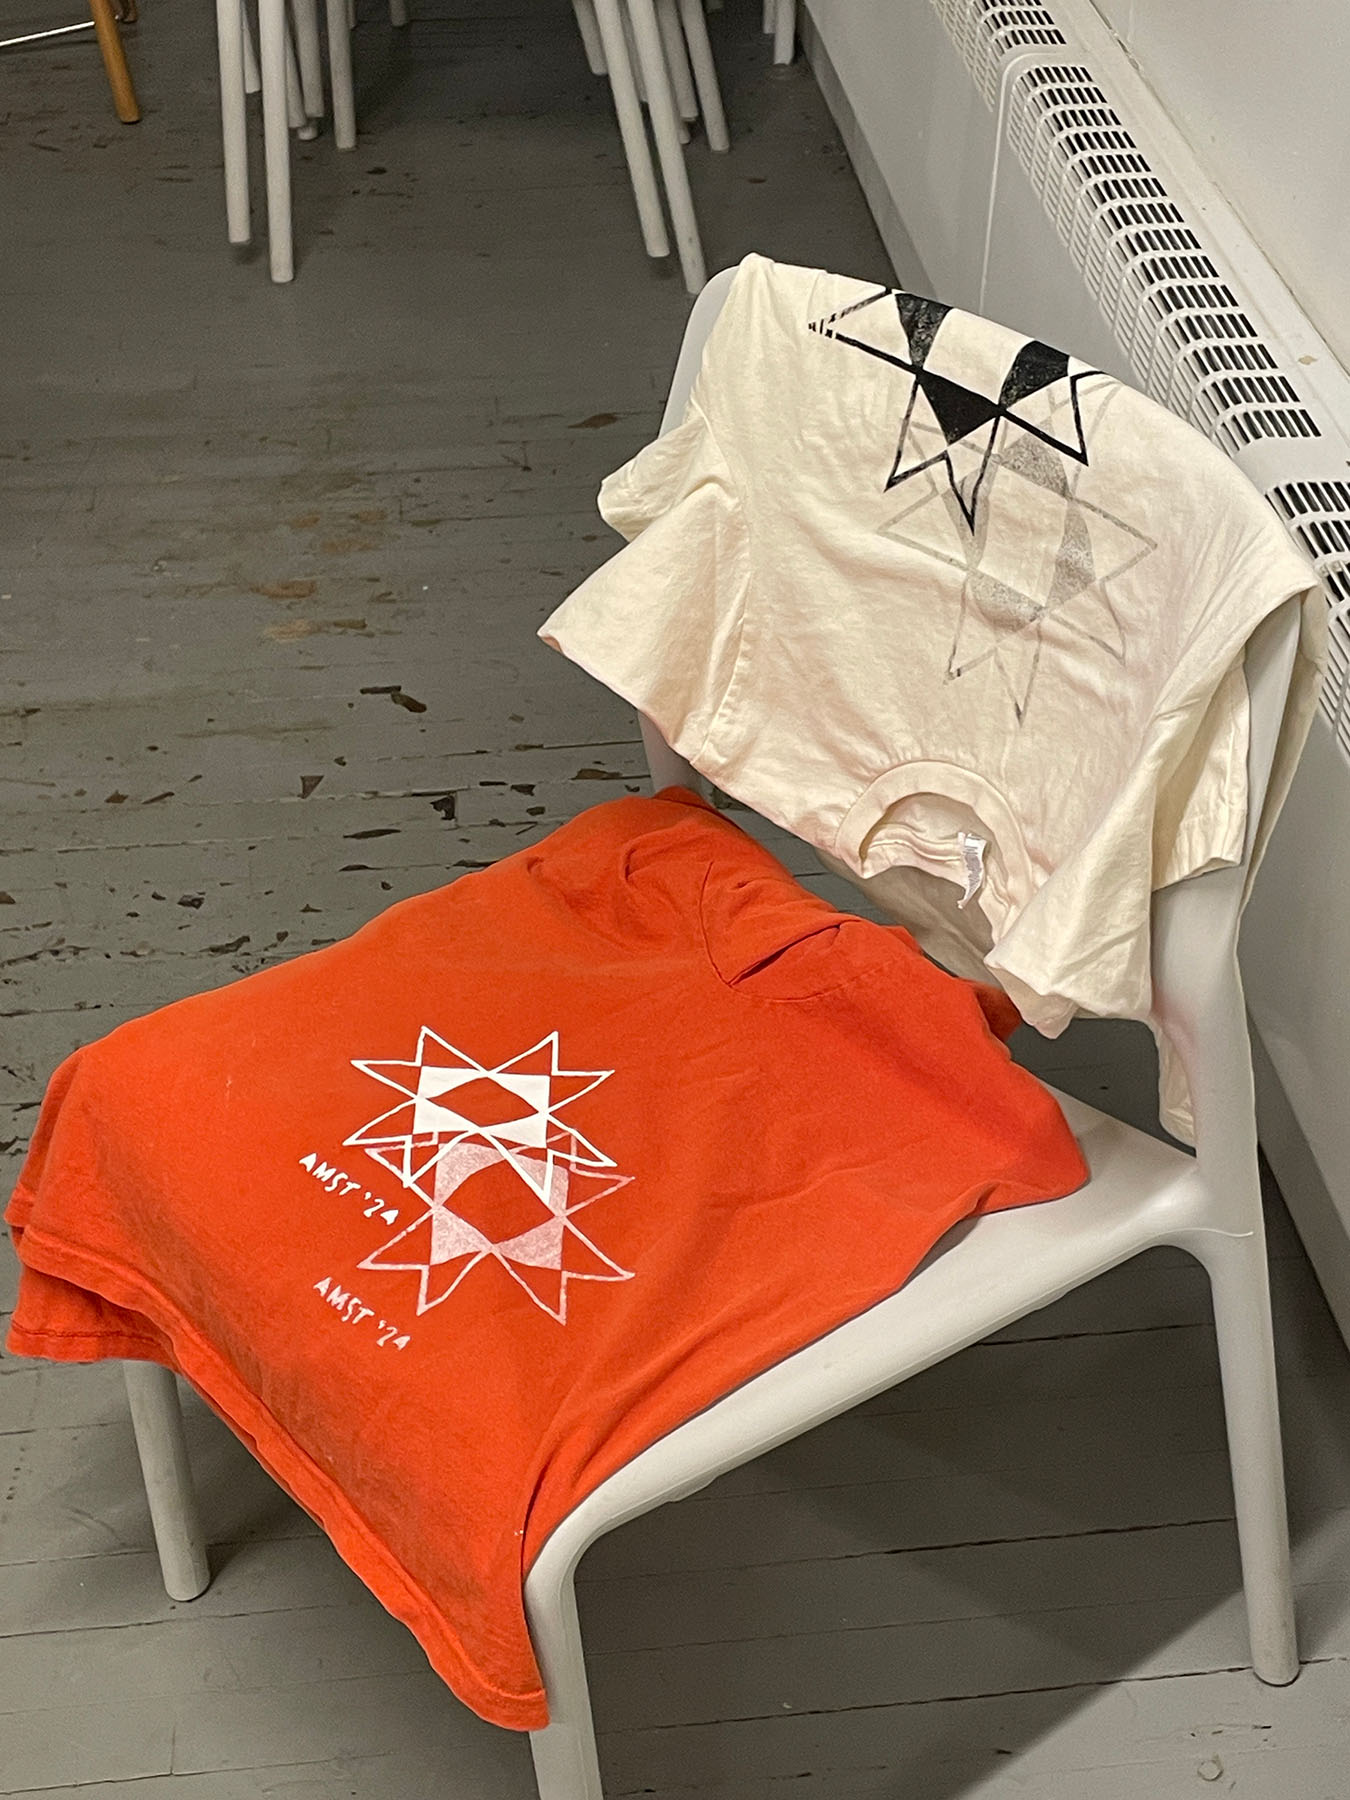 Orange and tan screen printed t-shirts hanging on a chair.